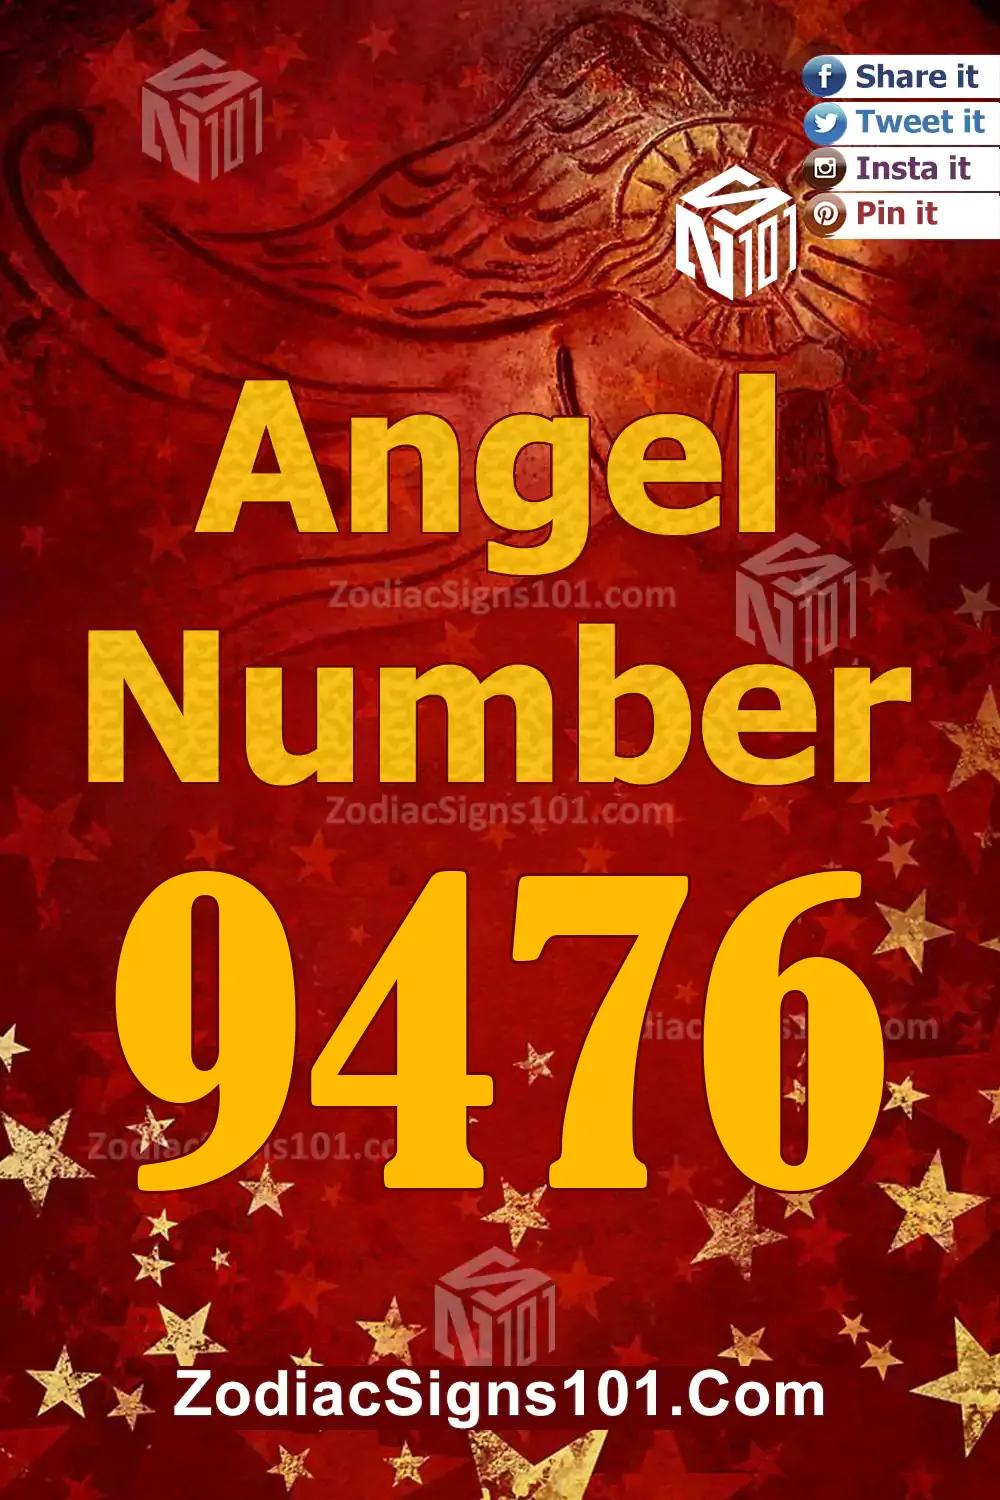 9476 Angel Number Meaning